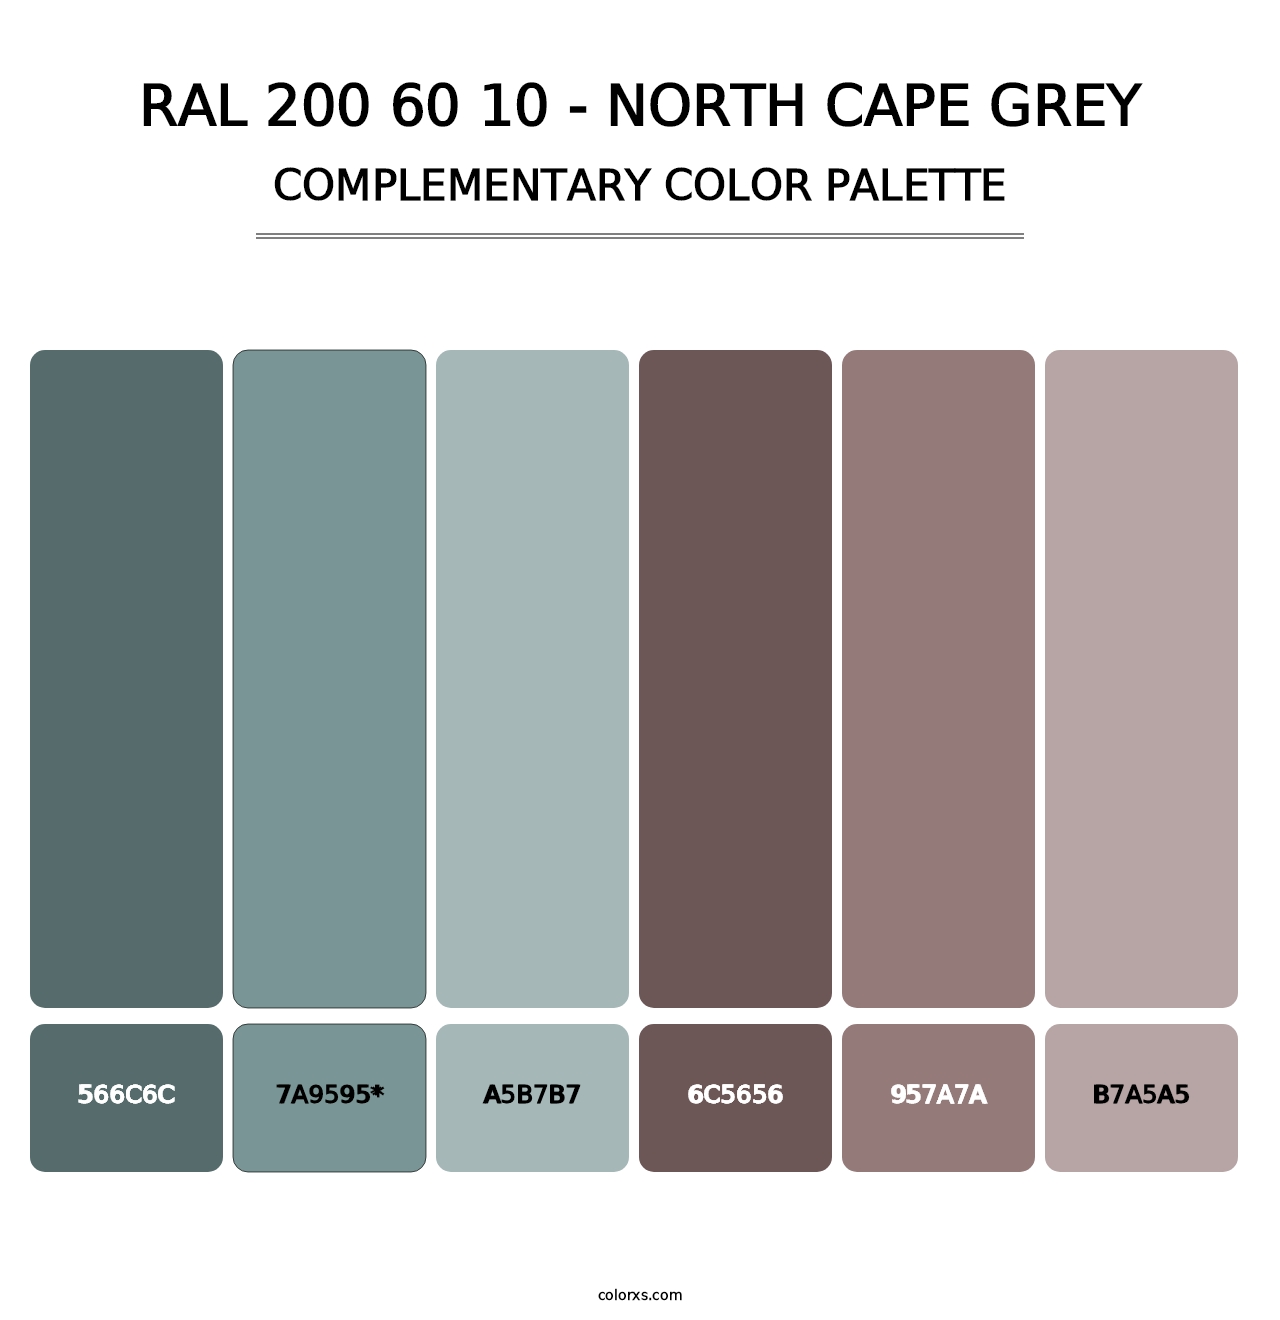 RAL 200 60 10 - North Cape Grey - Complementary Color Palette